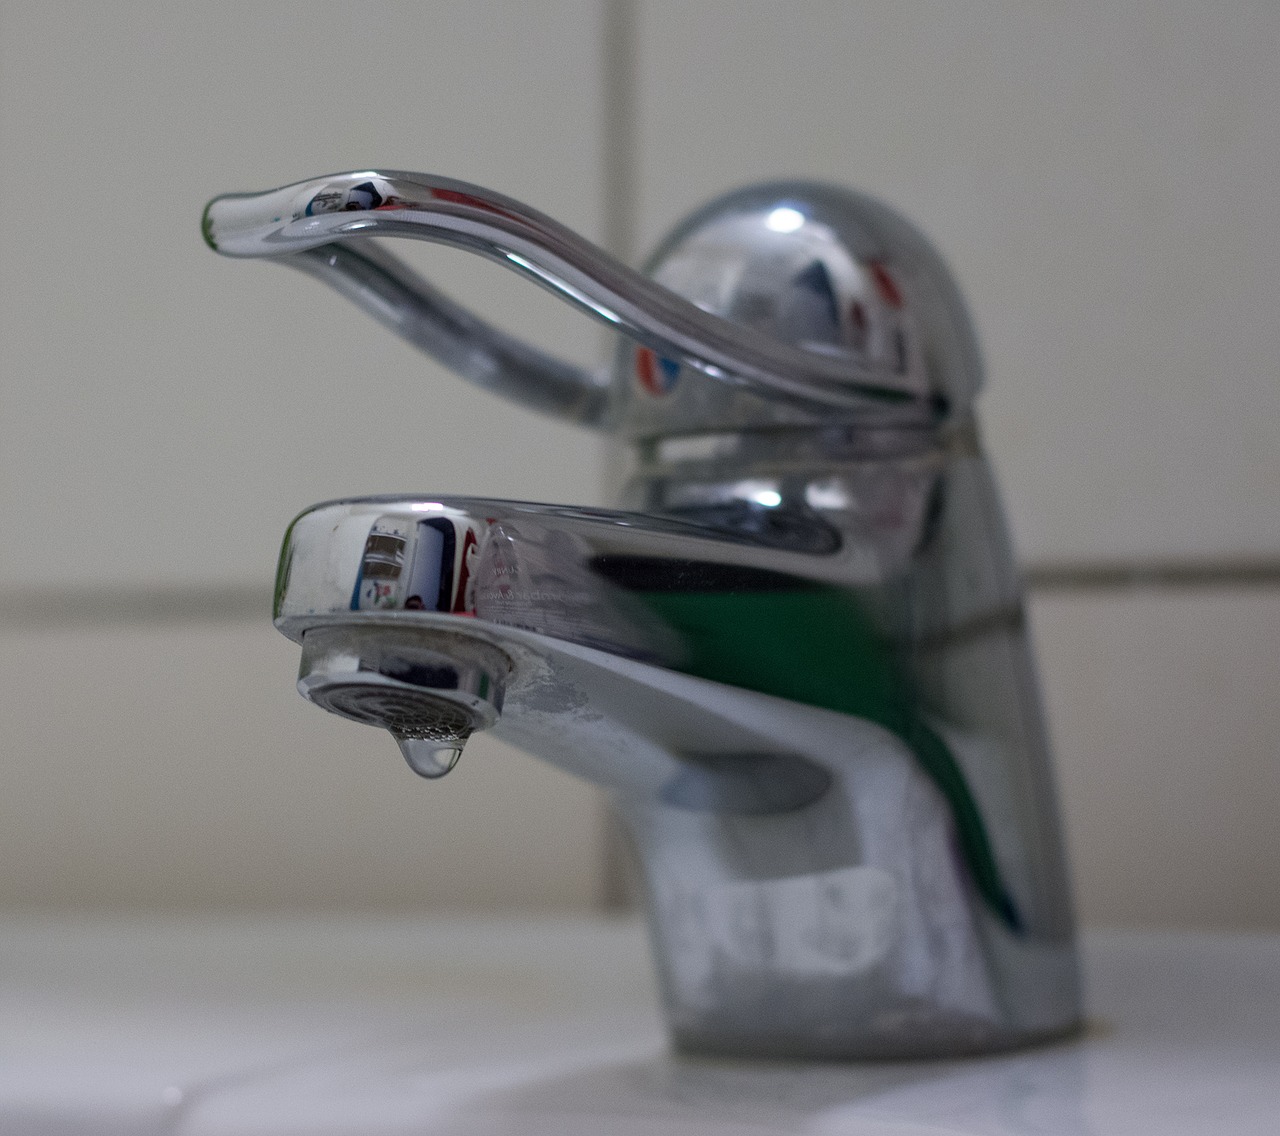 tap water bathroom faucet free photo